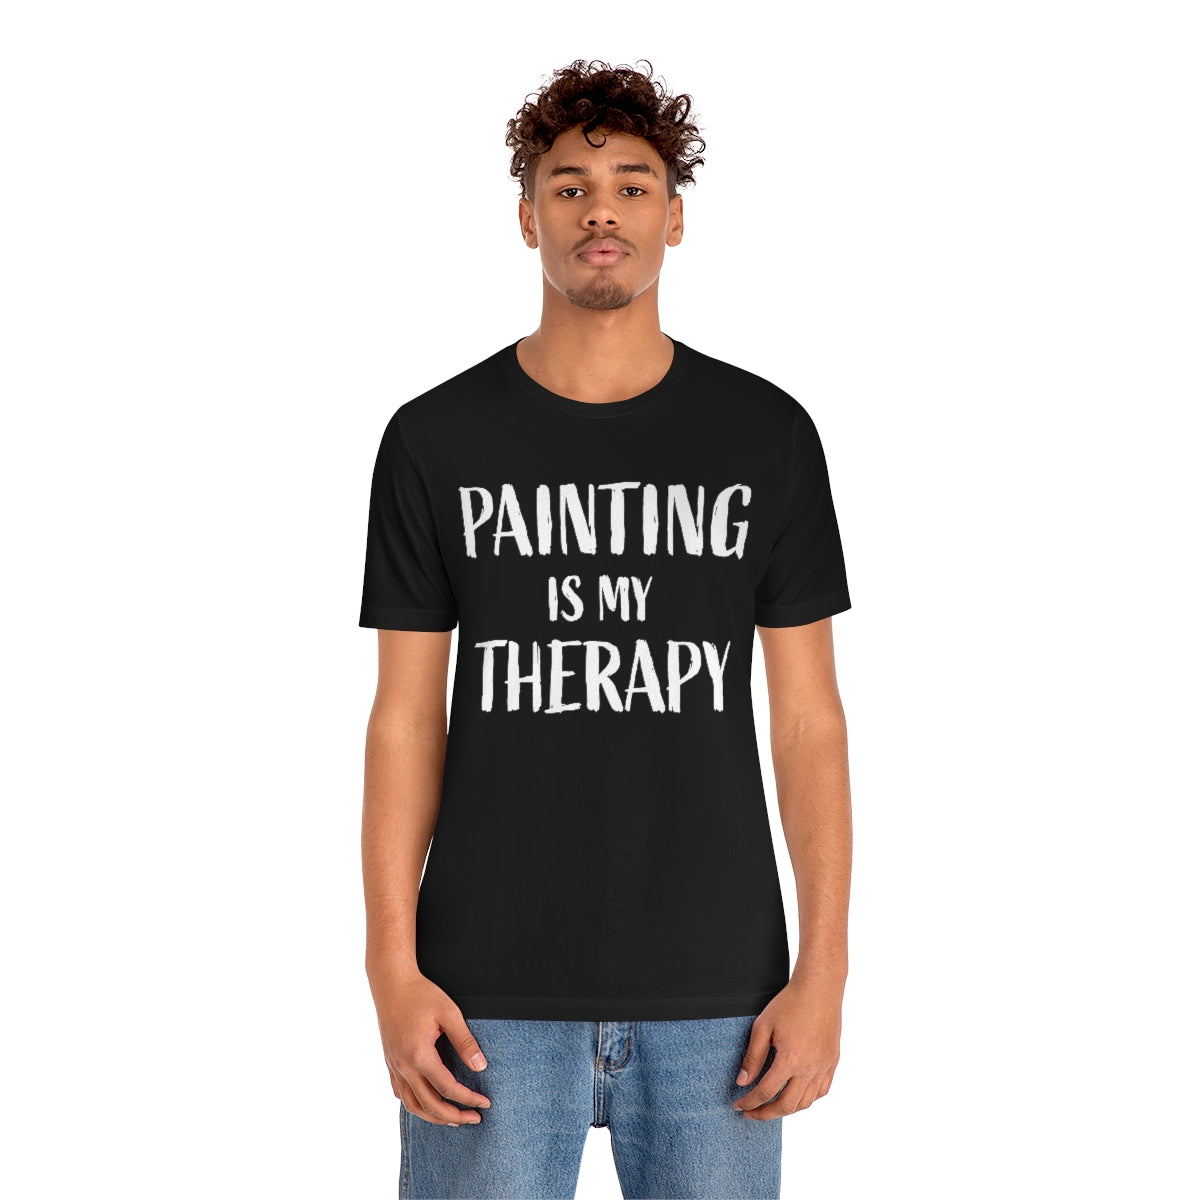 Painting is my therapy Short Sleeve Tee